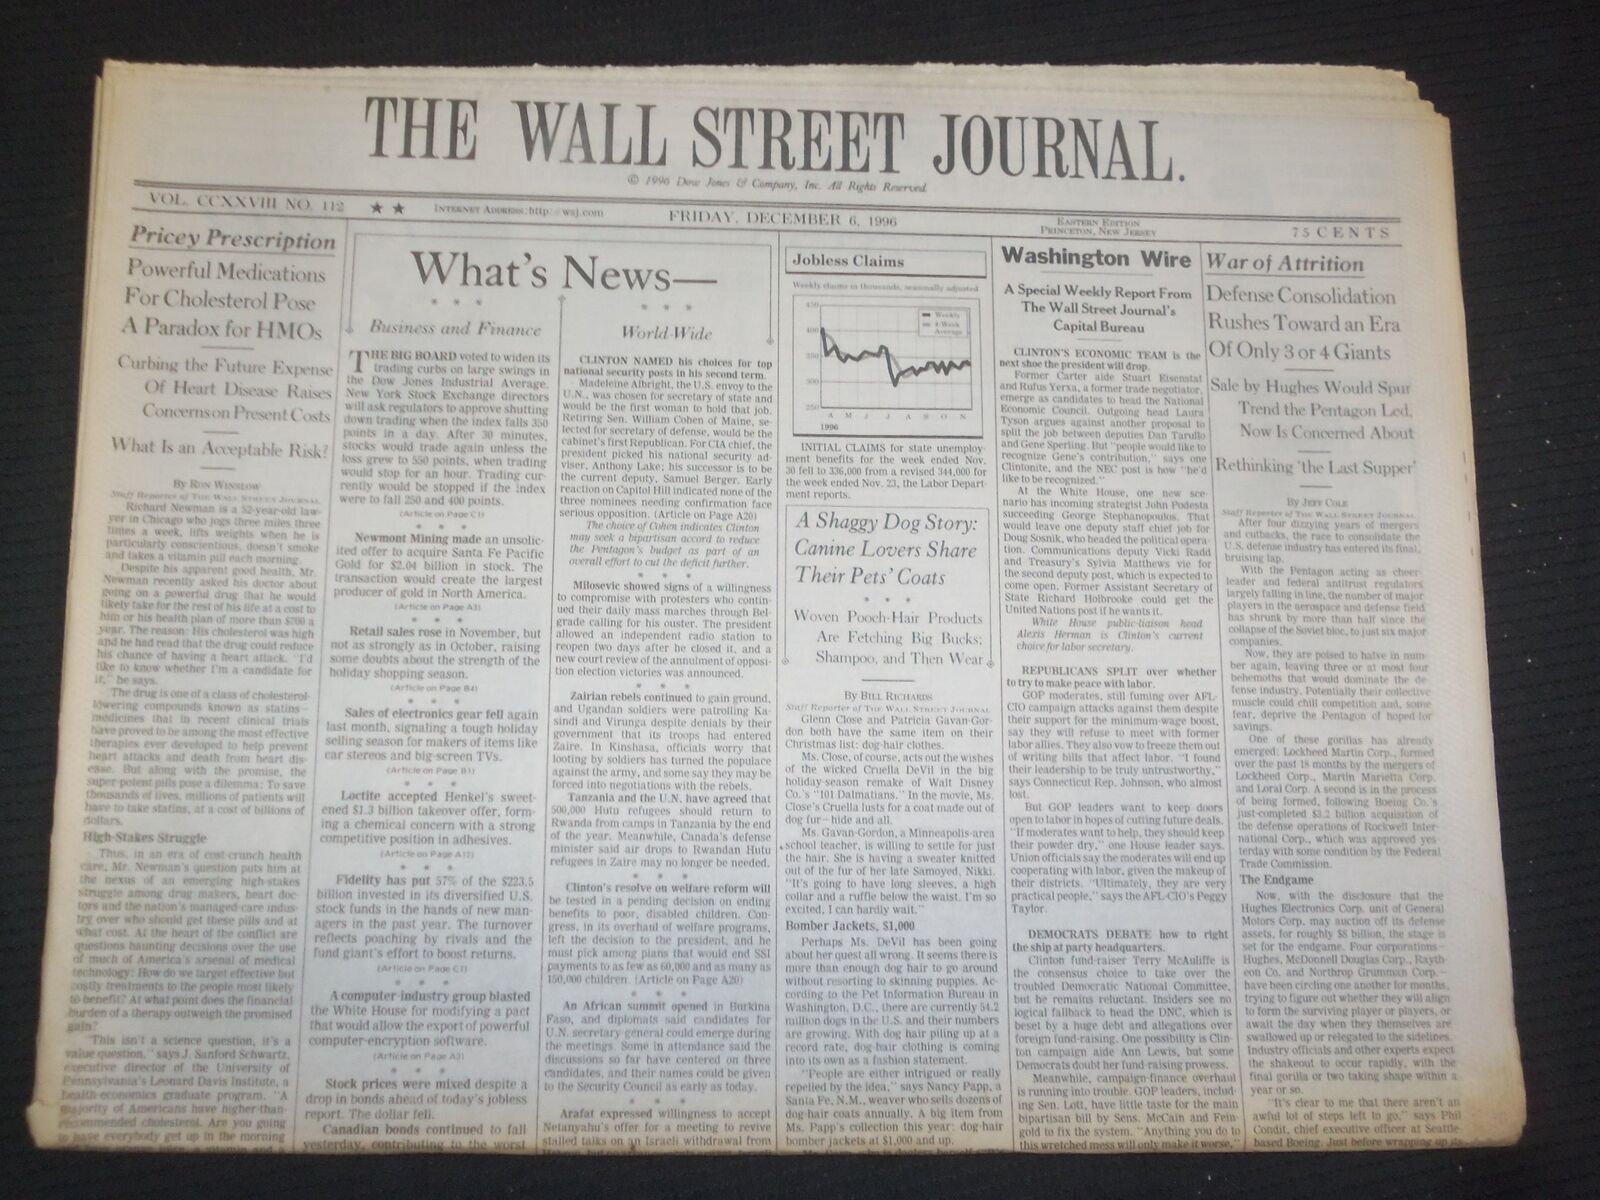 1996 DECEMBER 6 THE WALL STREET JOURNAL - MEDICATIONS FOR CHOLESTEROL - WJ 273